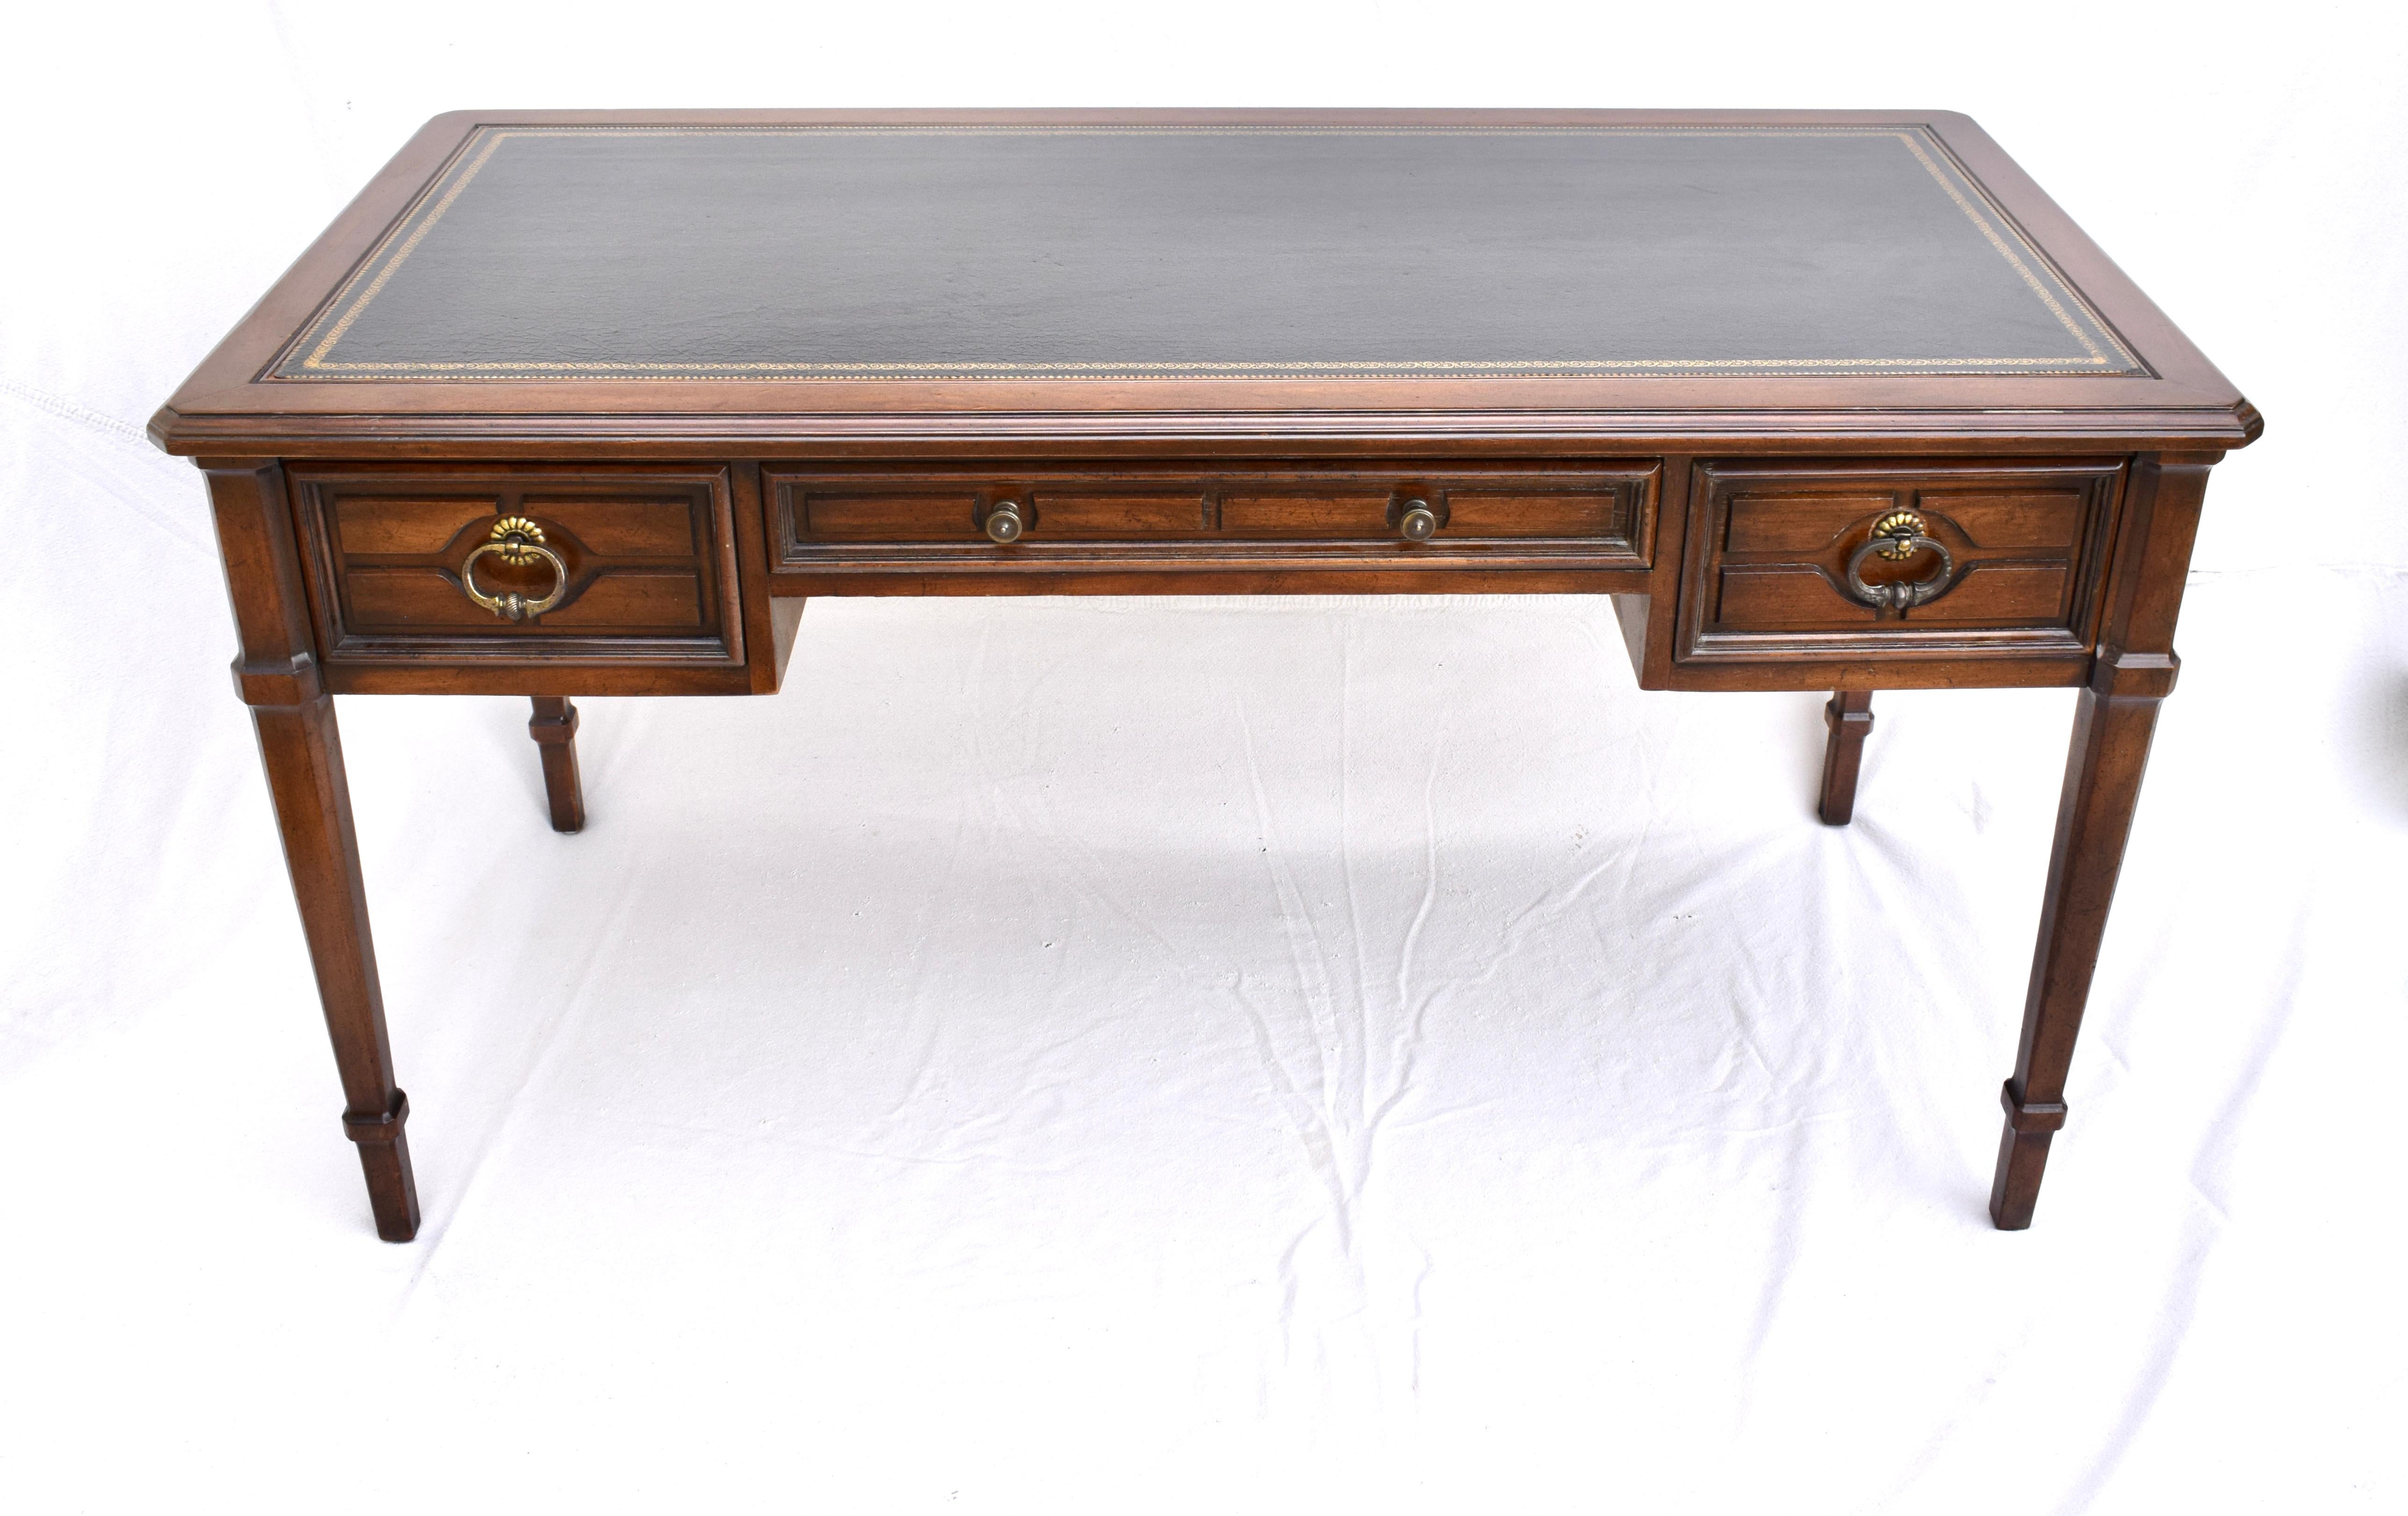 Striking French Directoire style walnut desk by Sligh Lowrey with three dovetailed drawers finished on all sides with striking black gold tooled leather top. Classic lines suitable for open floor plan placement.